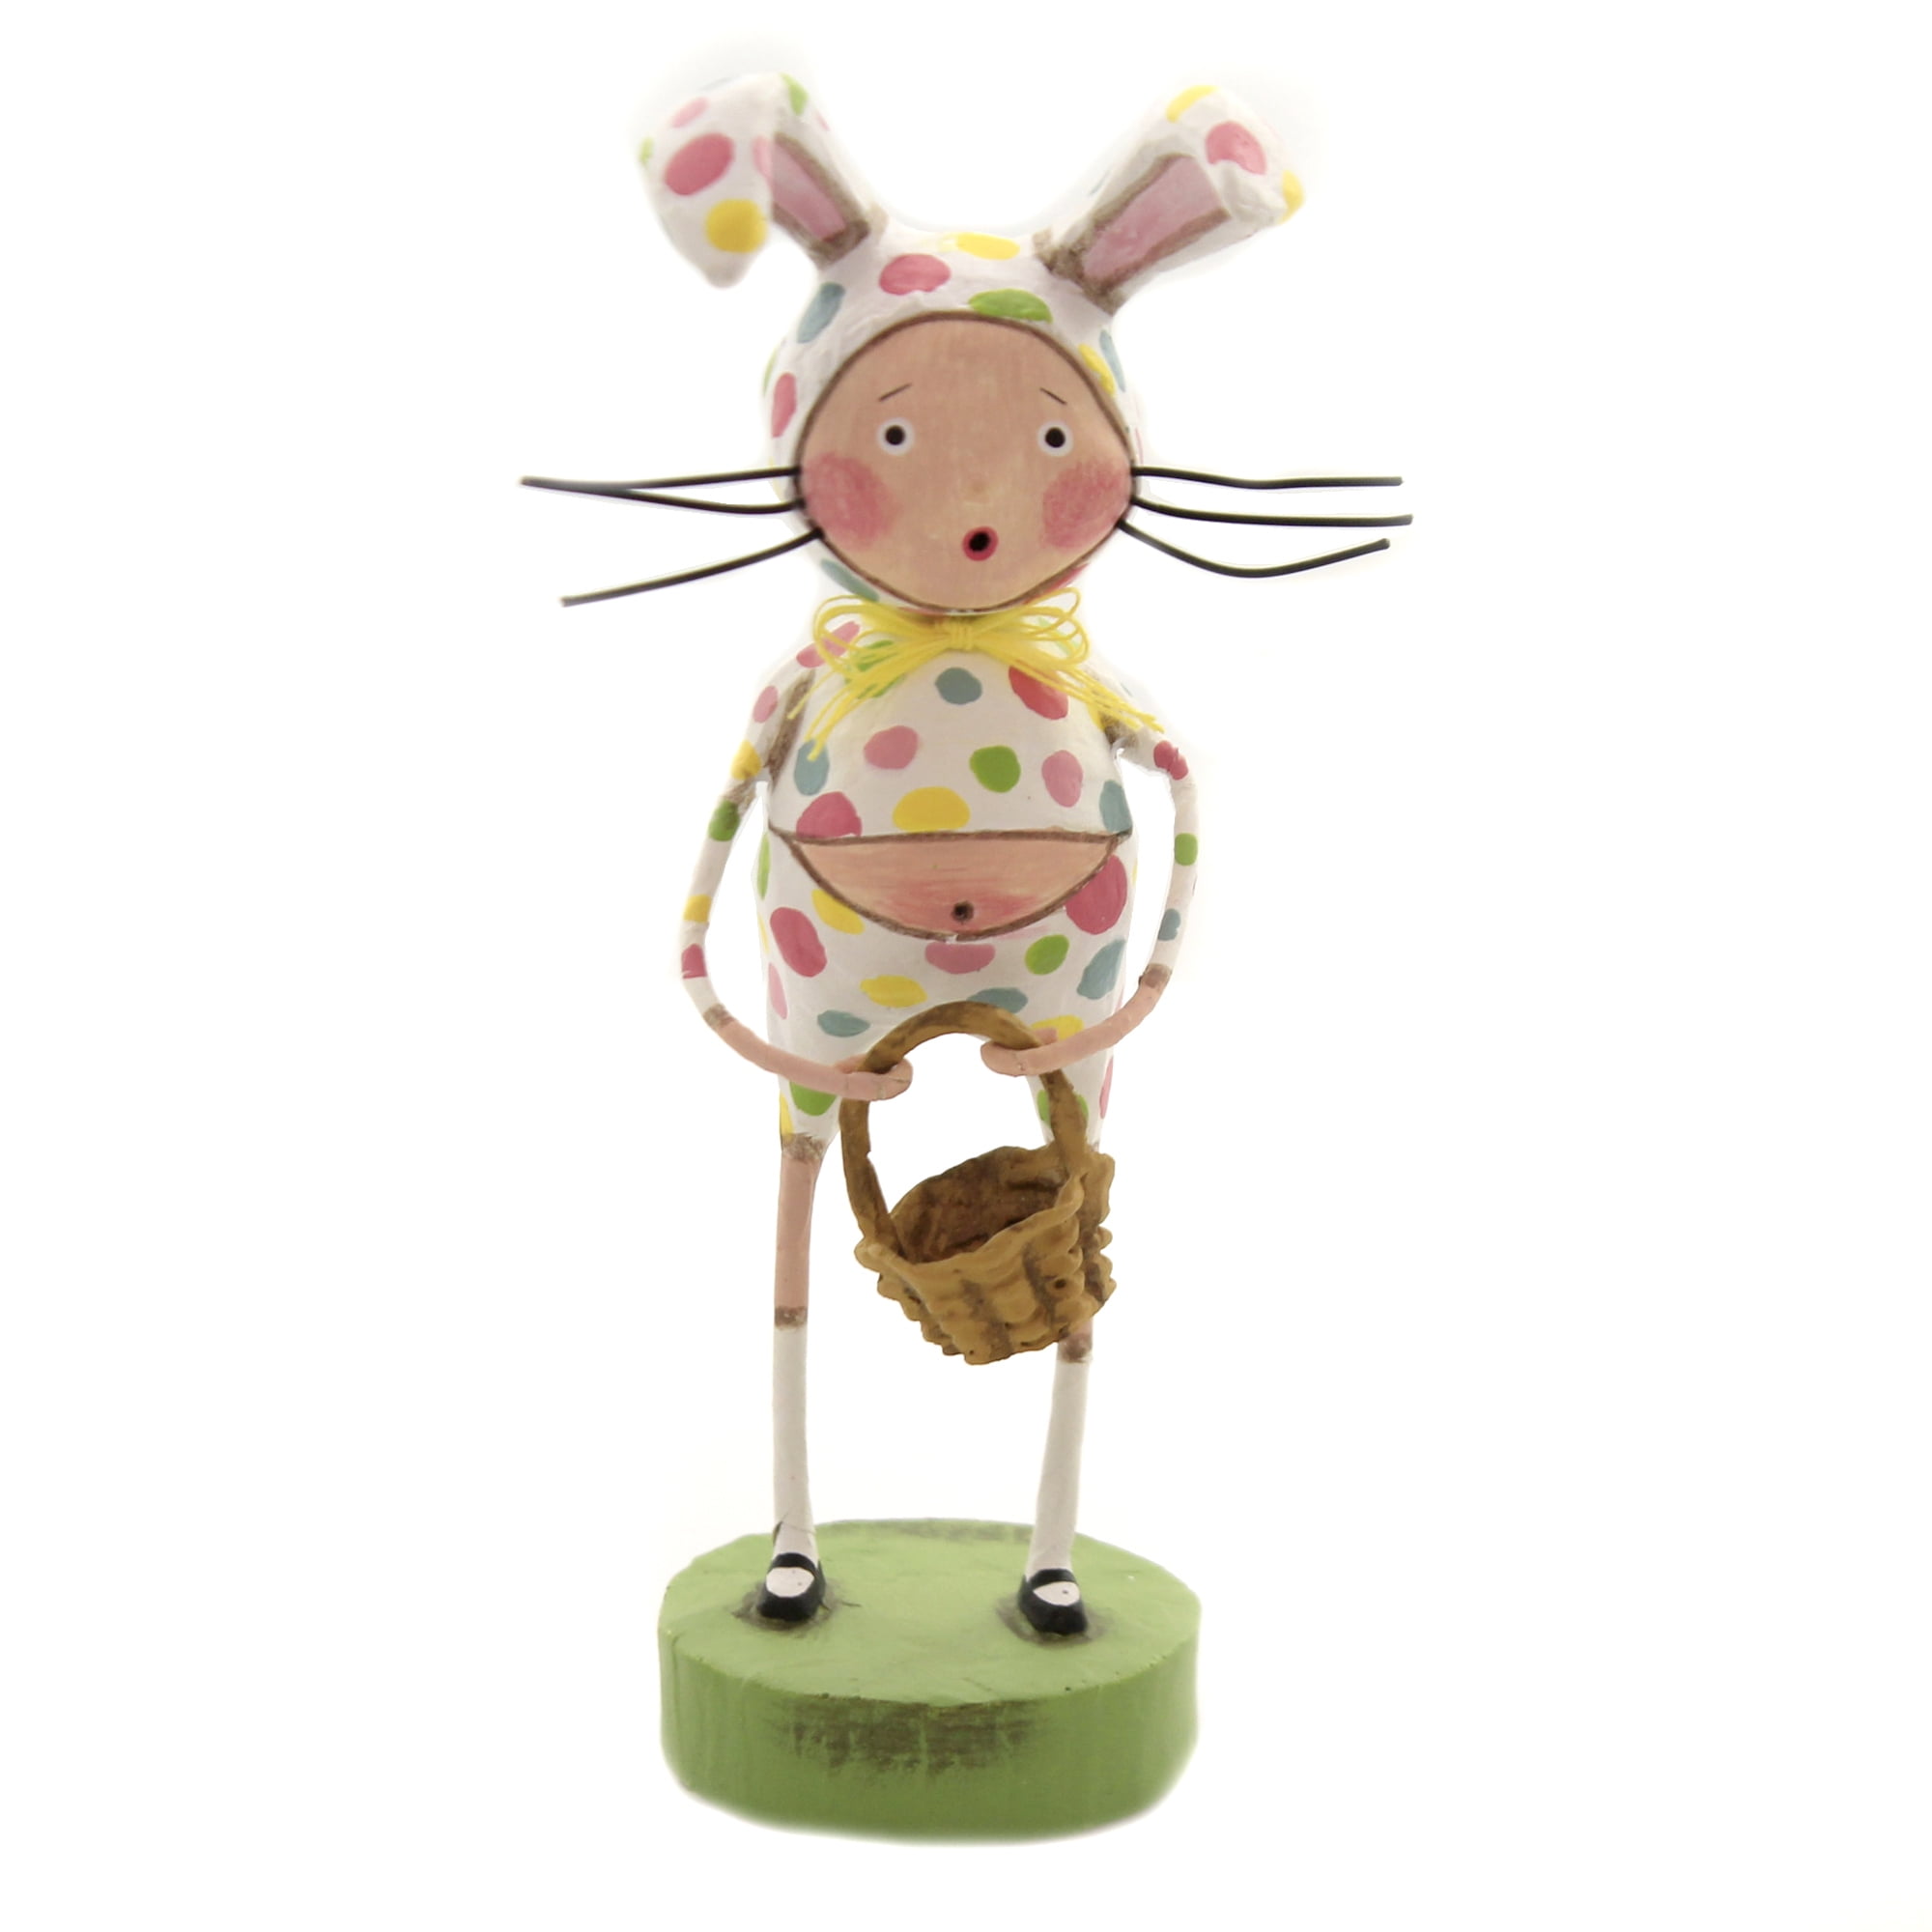 Eggland's Best Duo Lori Mitchell™ 80059 Kids Easter Bunny in Egg 